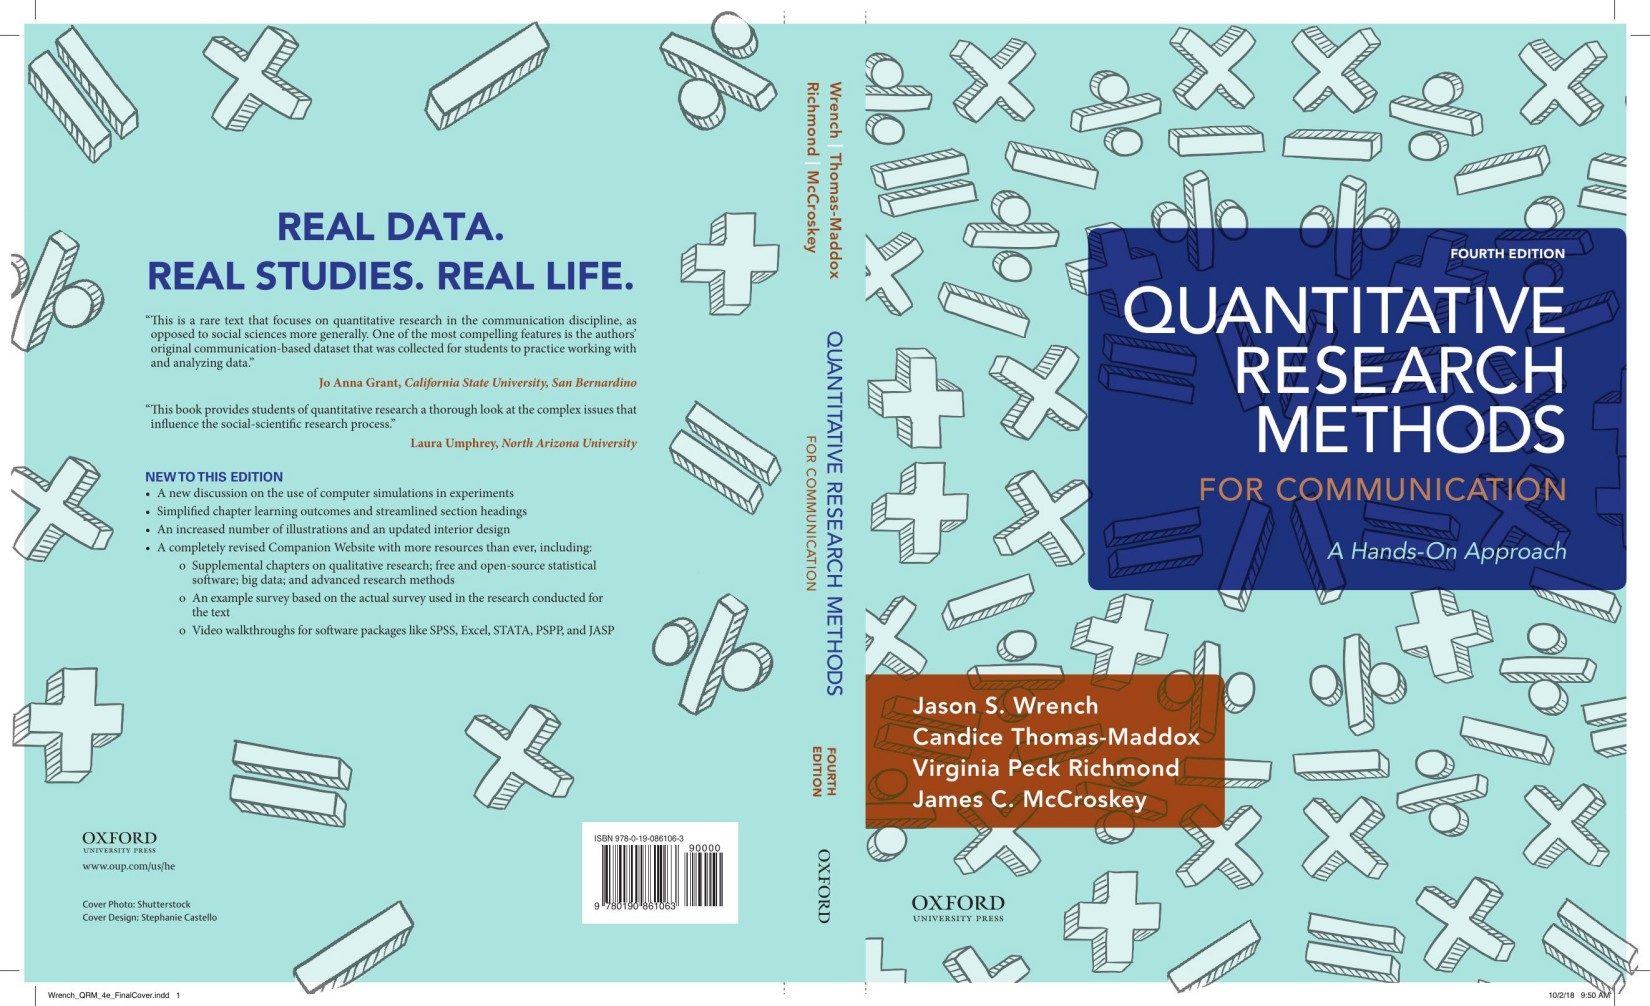 (eBook PDF)Quantitative Research Methods for Communication 4th Edition by Jason S. Wrench,Candice Thomas-Maddox,Candice Thomas-Maddox